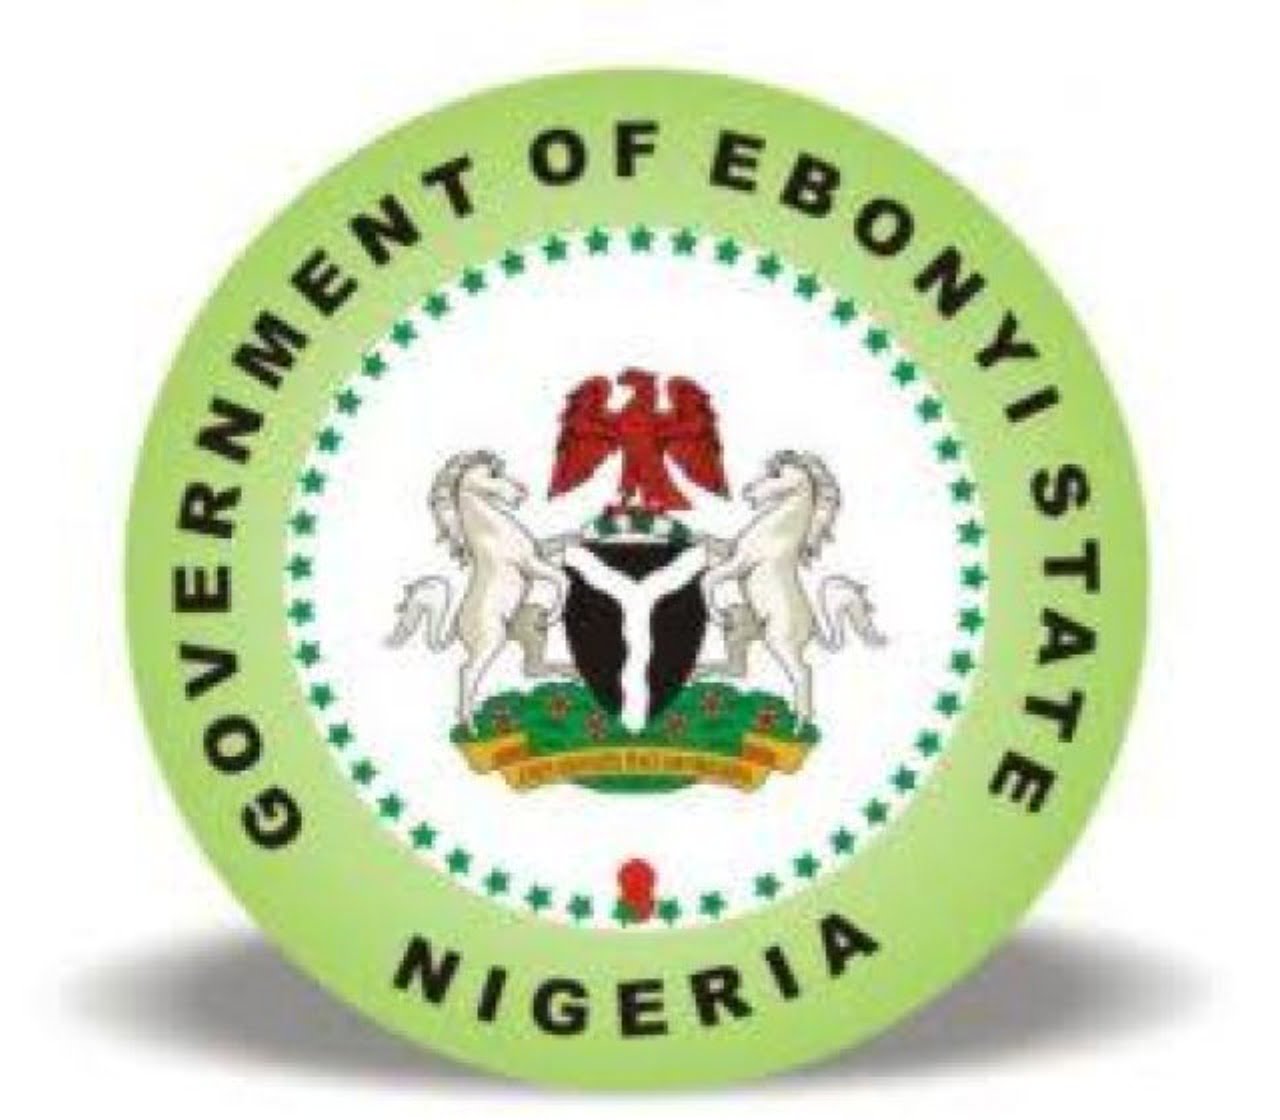 Discovery of lead cause of conflict between communities – Ebonyi Govt